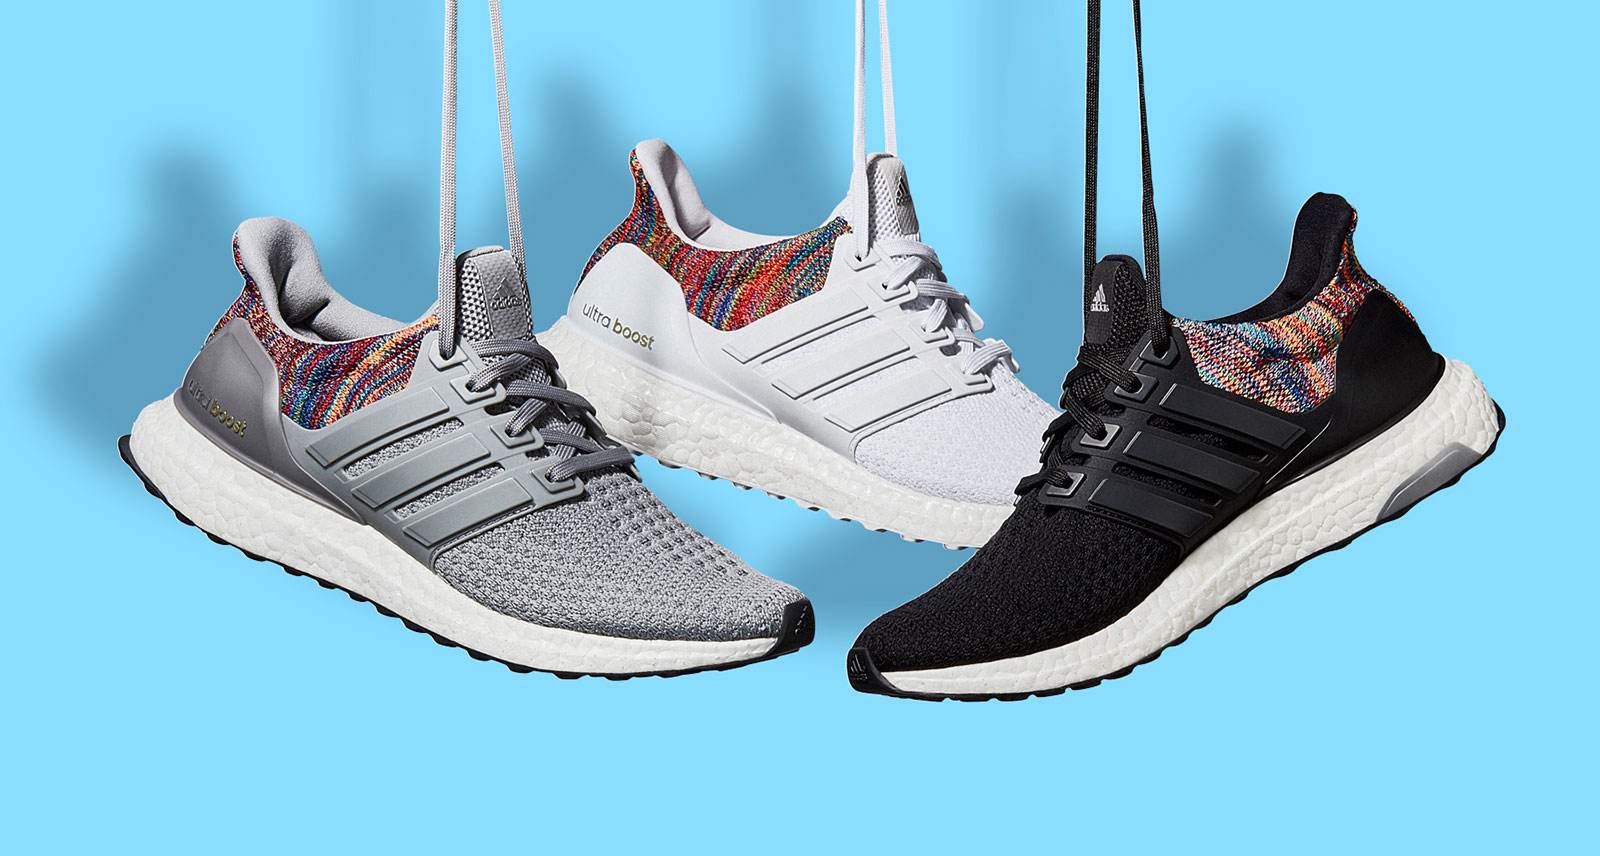 adidas Just Gave Their Most Comfortable Kicks a Stylish New Upgrade